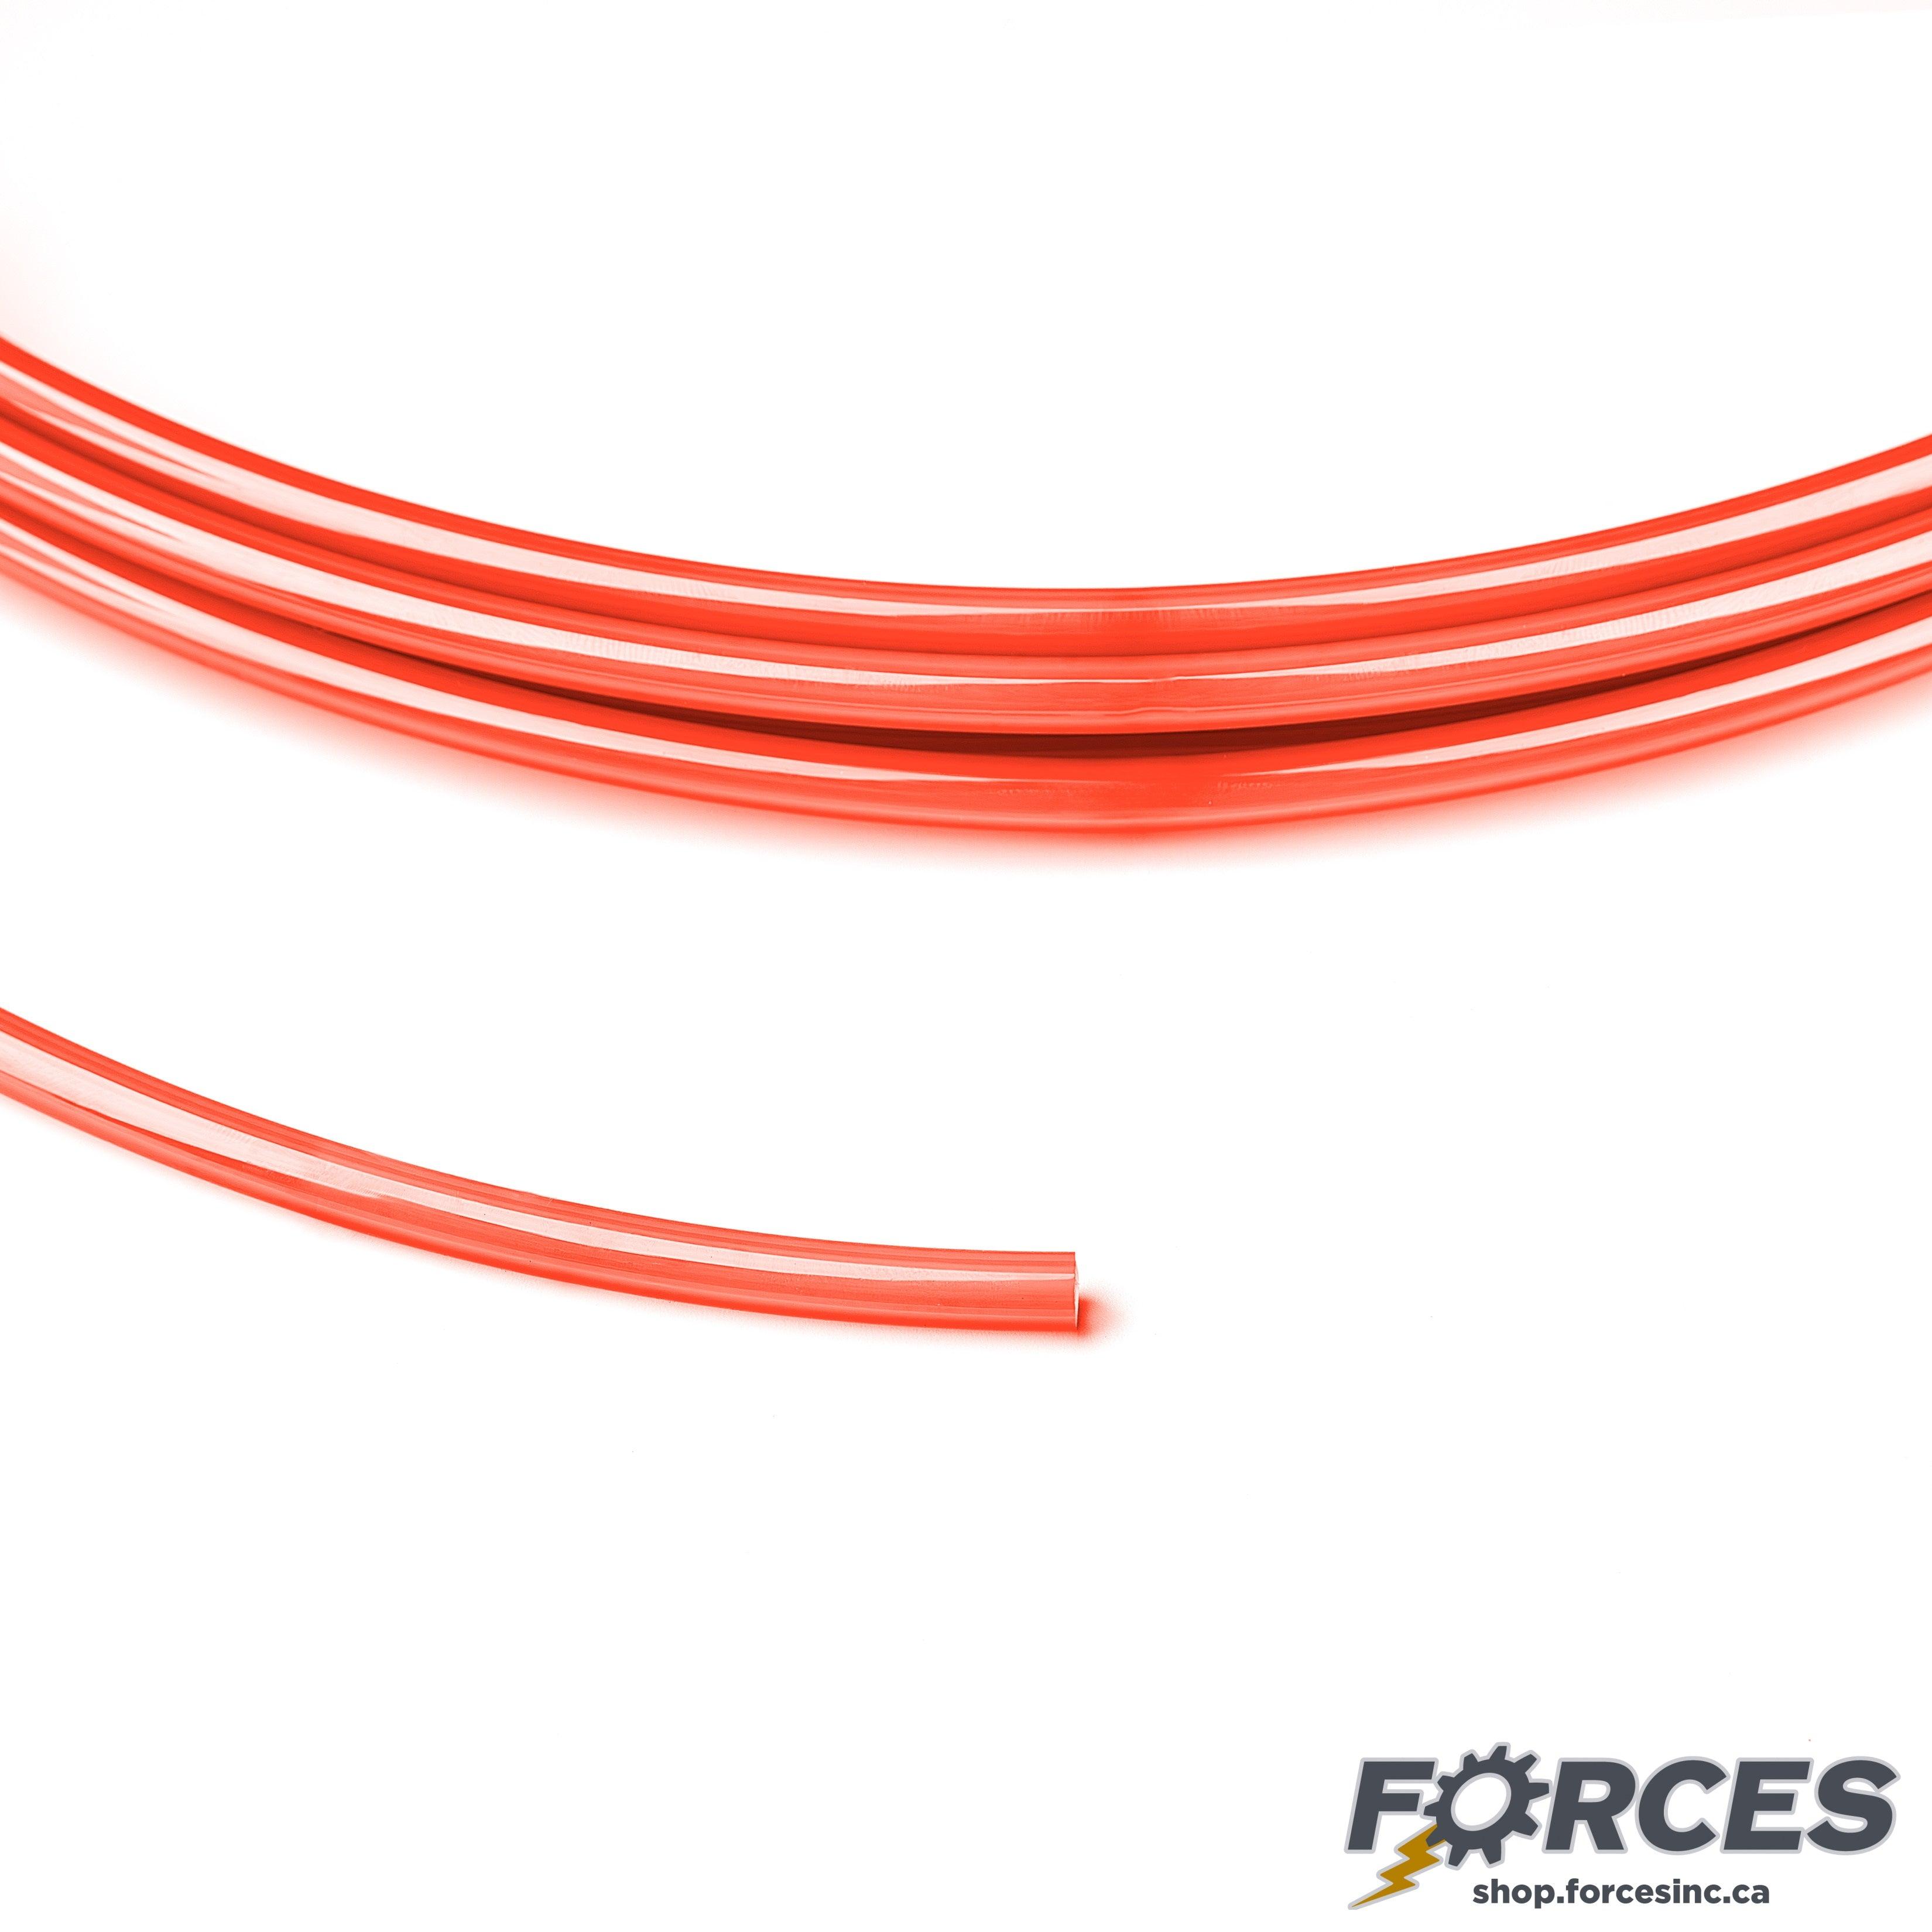 Pneumatic Air Tubing 3/8" x 6.4mm Red Polyurethane - 330ft - Forces Inc